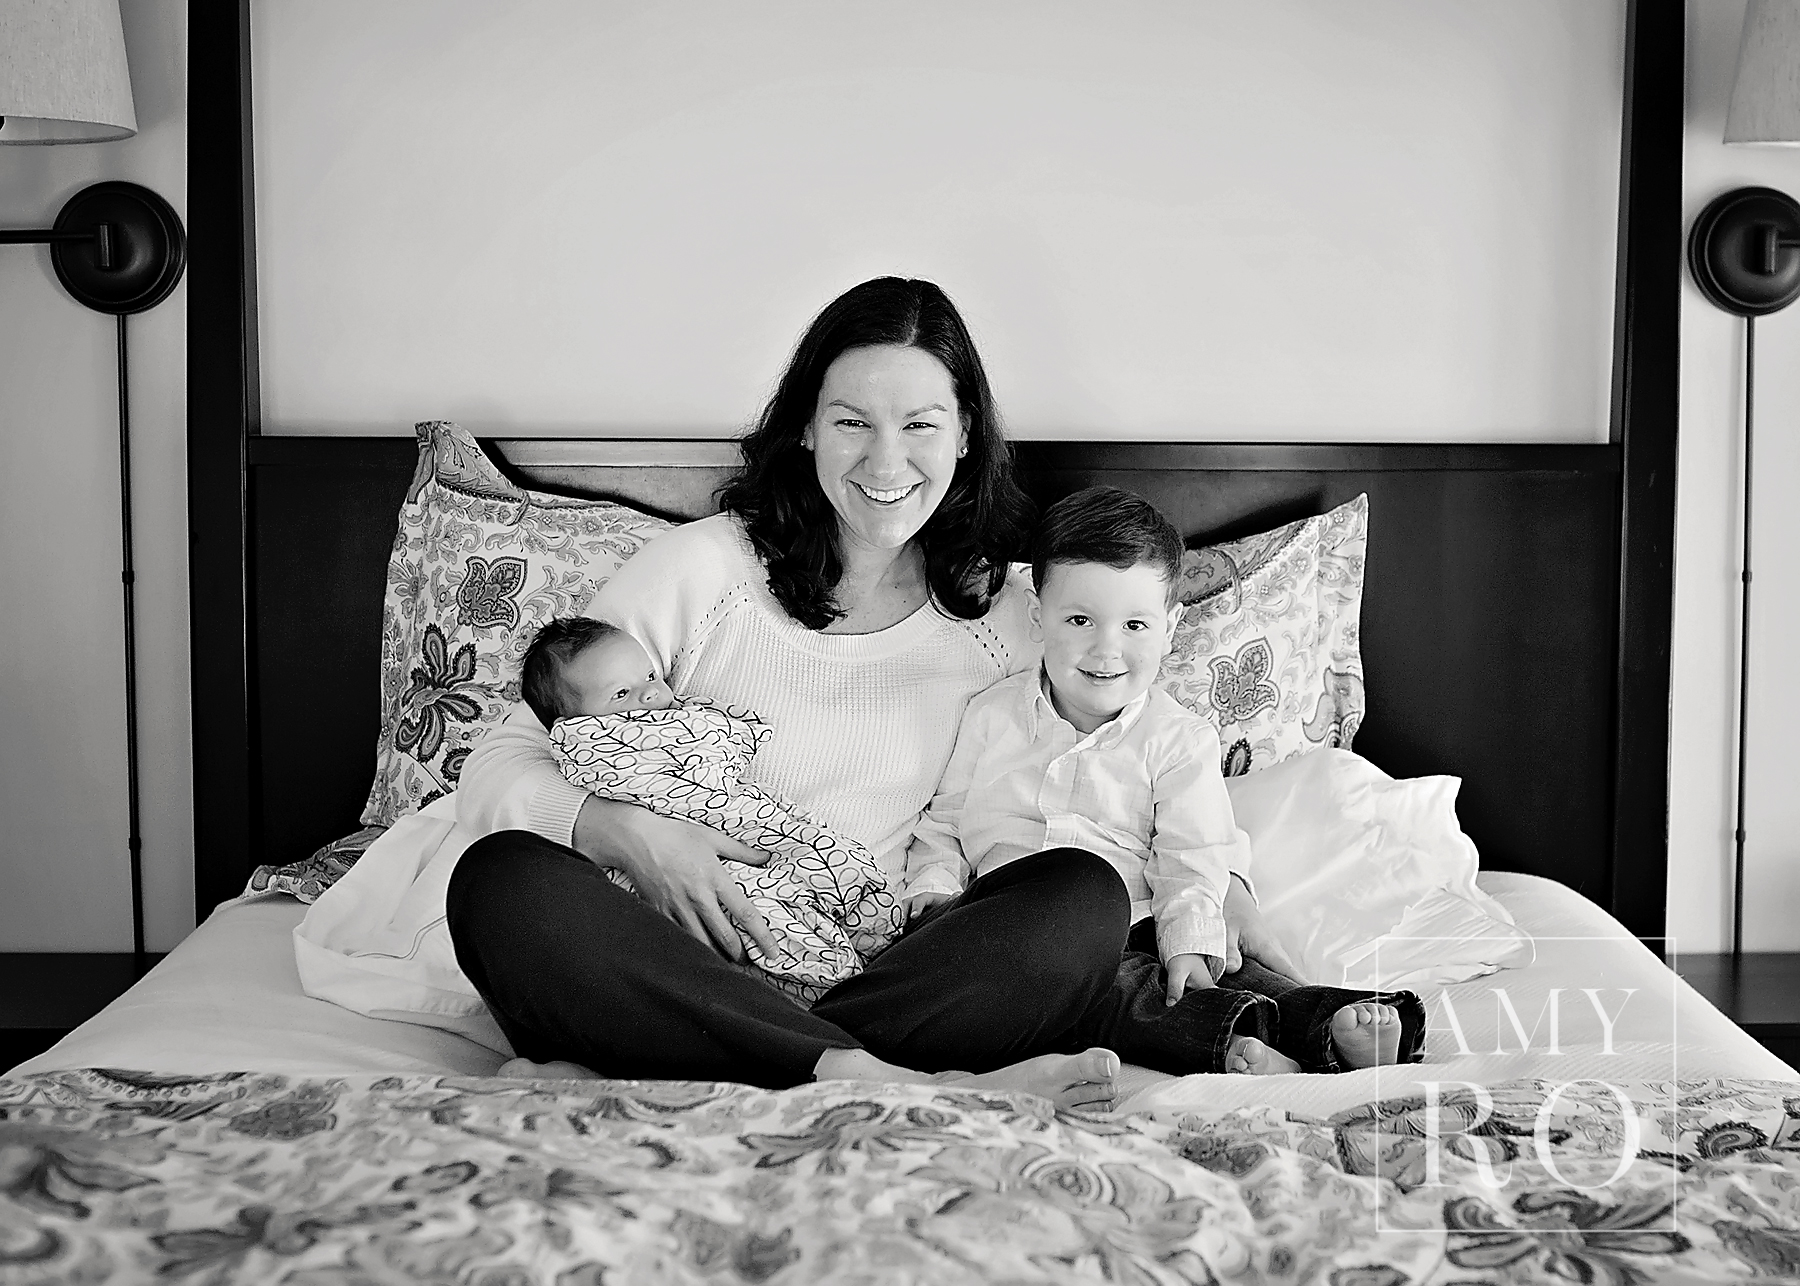 Black and white beautiful image of a mom with her toddler and newborn daughter taken during an in-home newborn photography session in Massachusetts